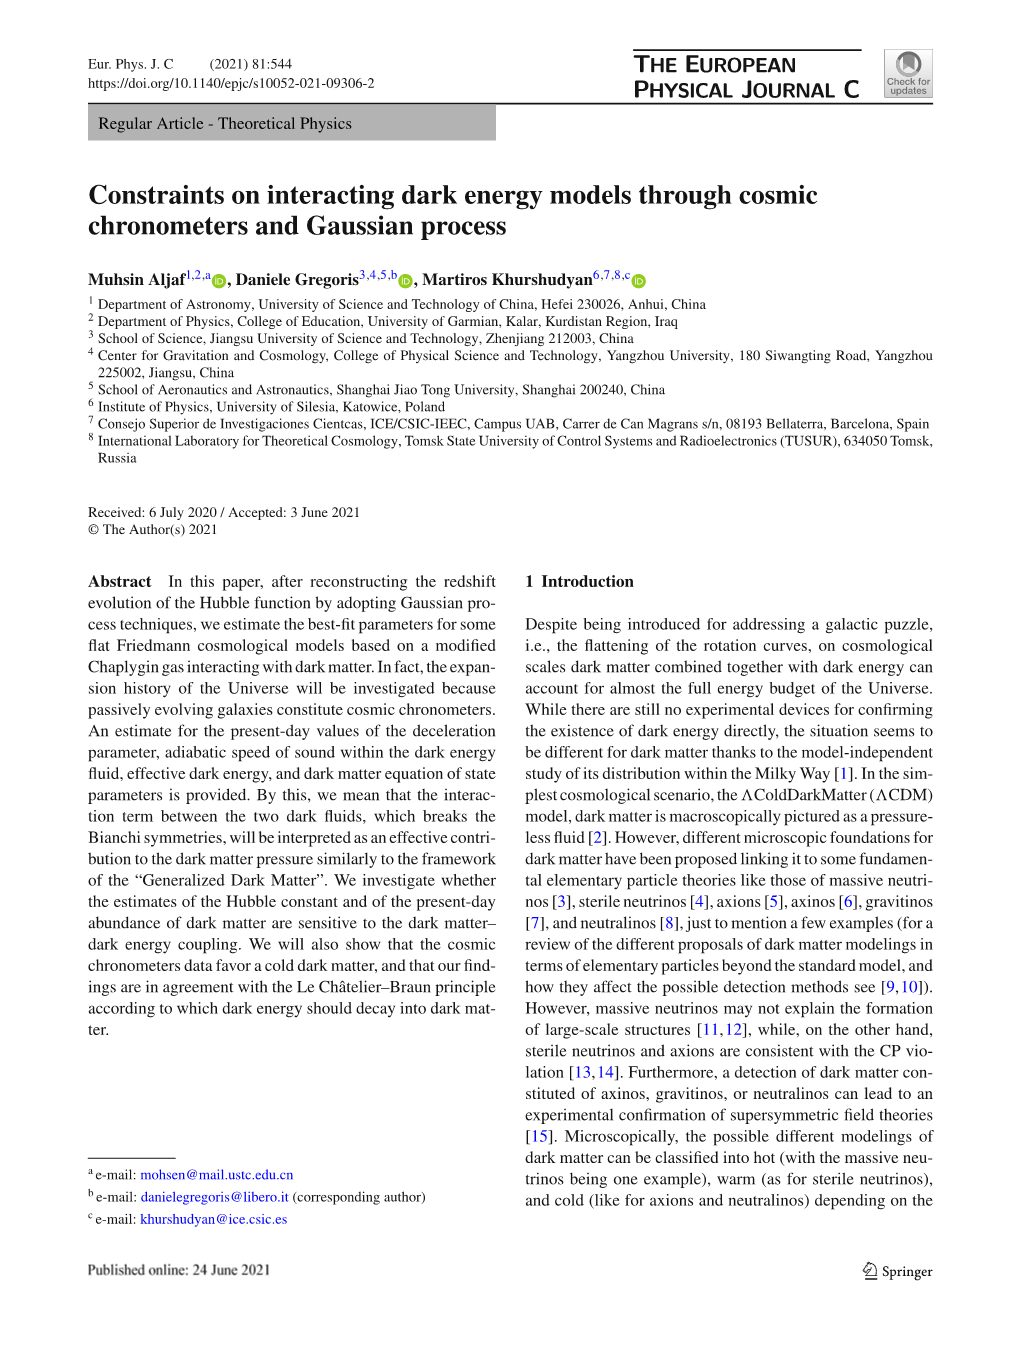 Constraints on Interacting Dark Energy Models Through Cosmic Chronometers and Gaussian Process